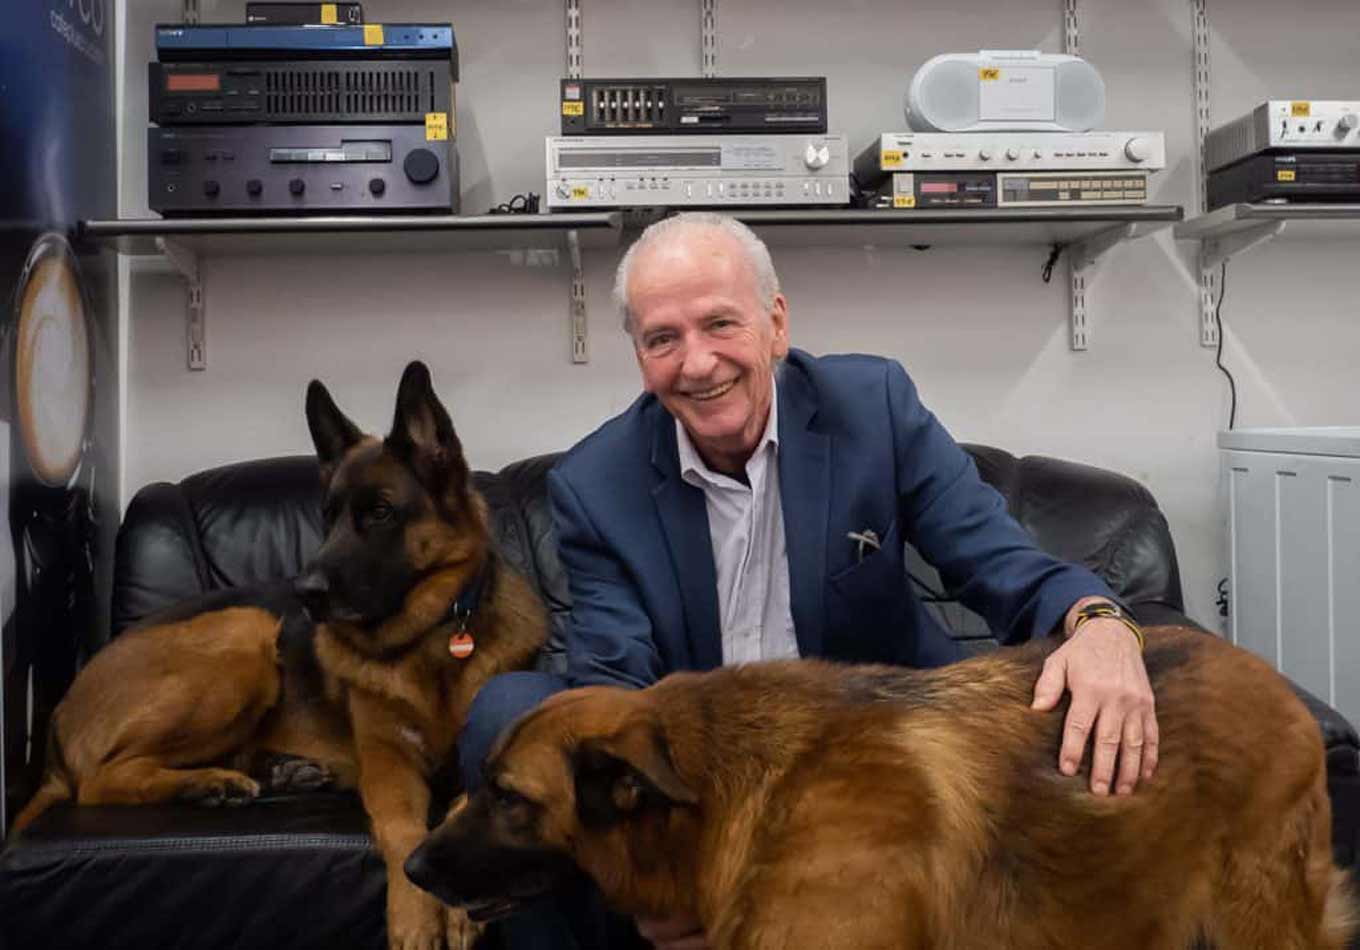 Sepp Eisenriegler poses smiling to the camera with his two dogs